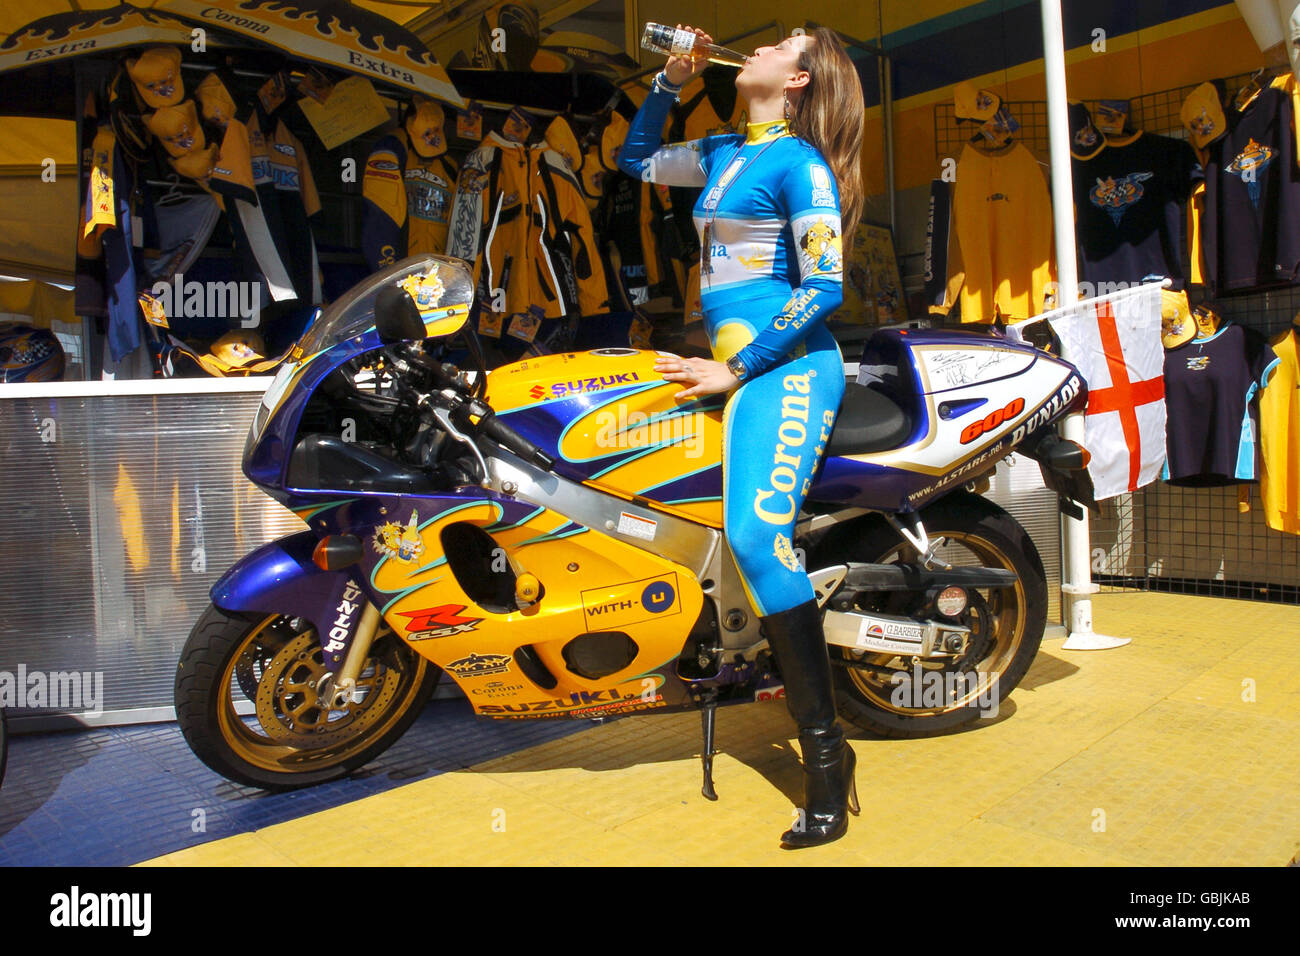 Motor Sport - FIM Superbike World Championship - Silverstone. A Corona girl takes a sip of beer Stock Photo